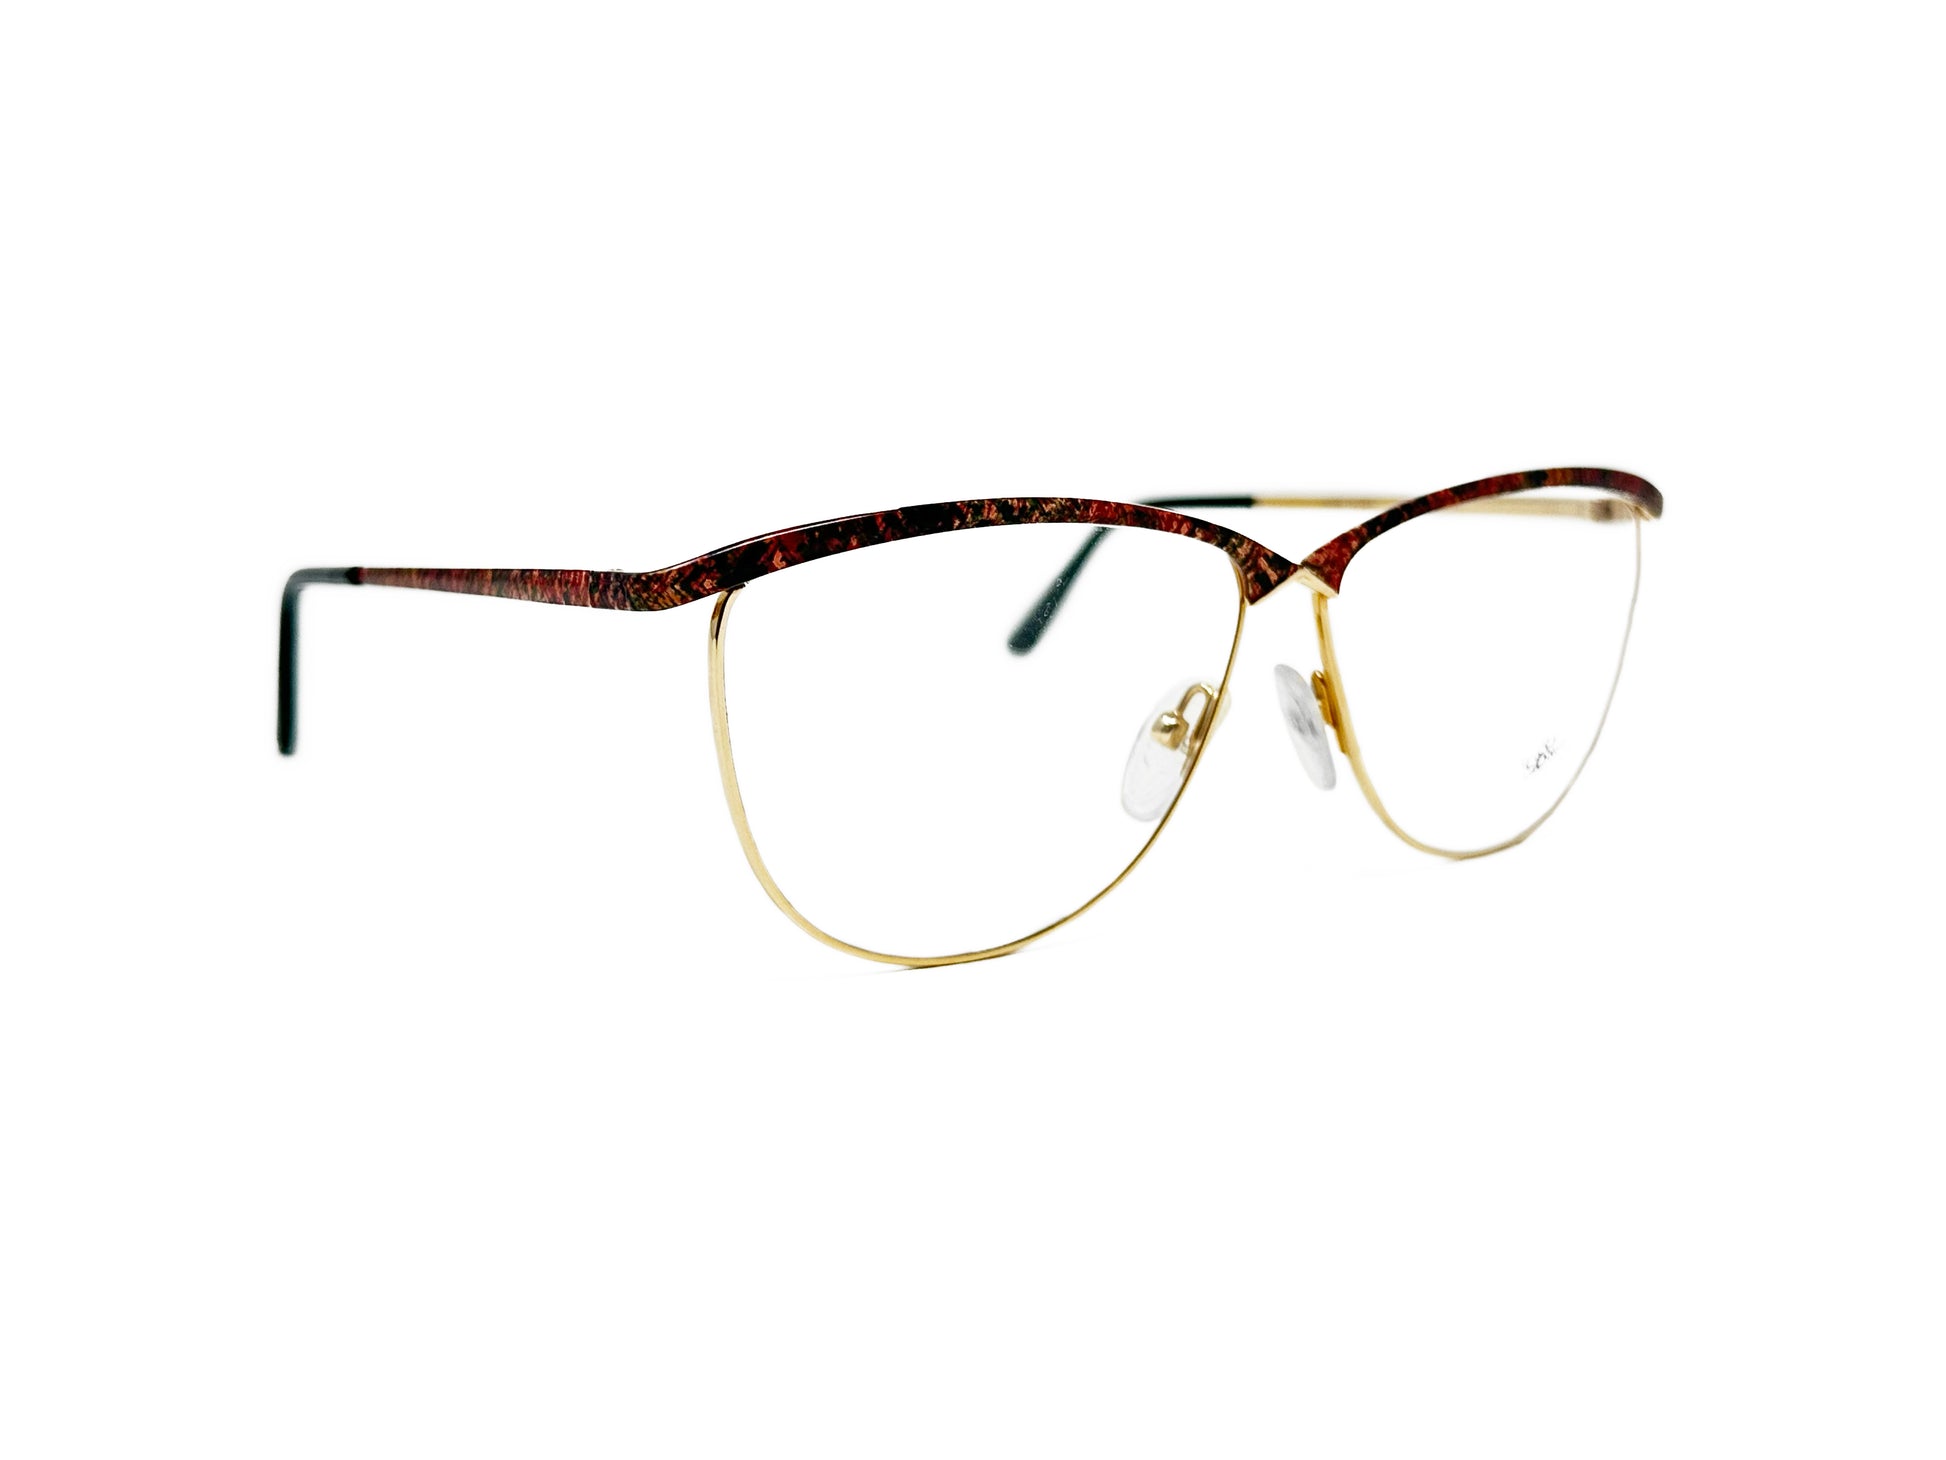 Logo Paris rounded cat-eye with wing tip top. Model: 191-44. Color: 061 - Red and gold metal. Side view.